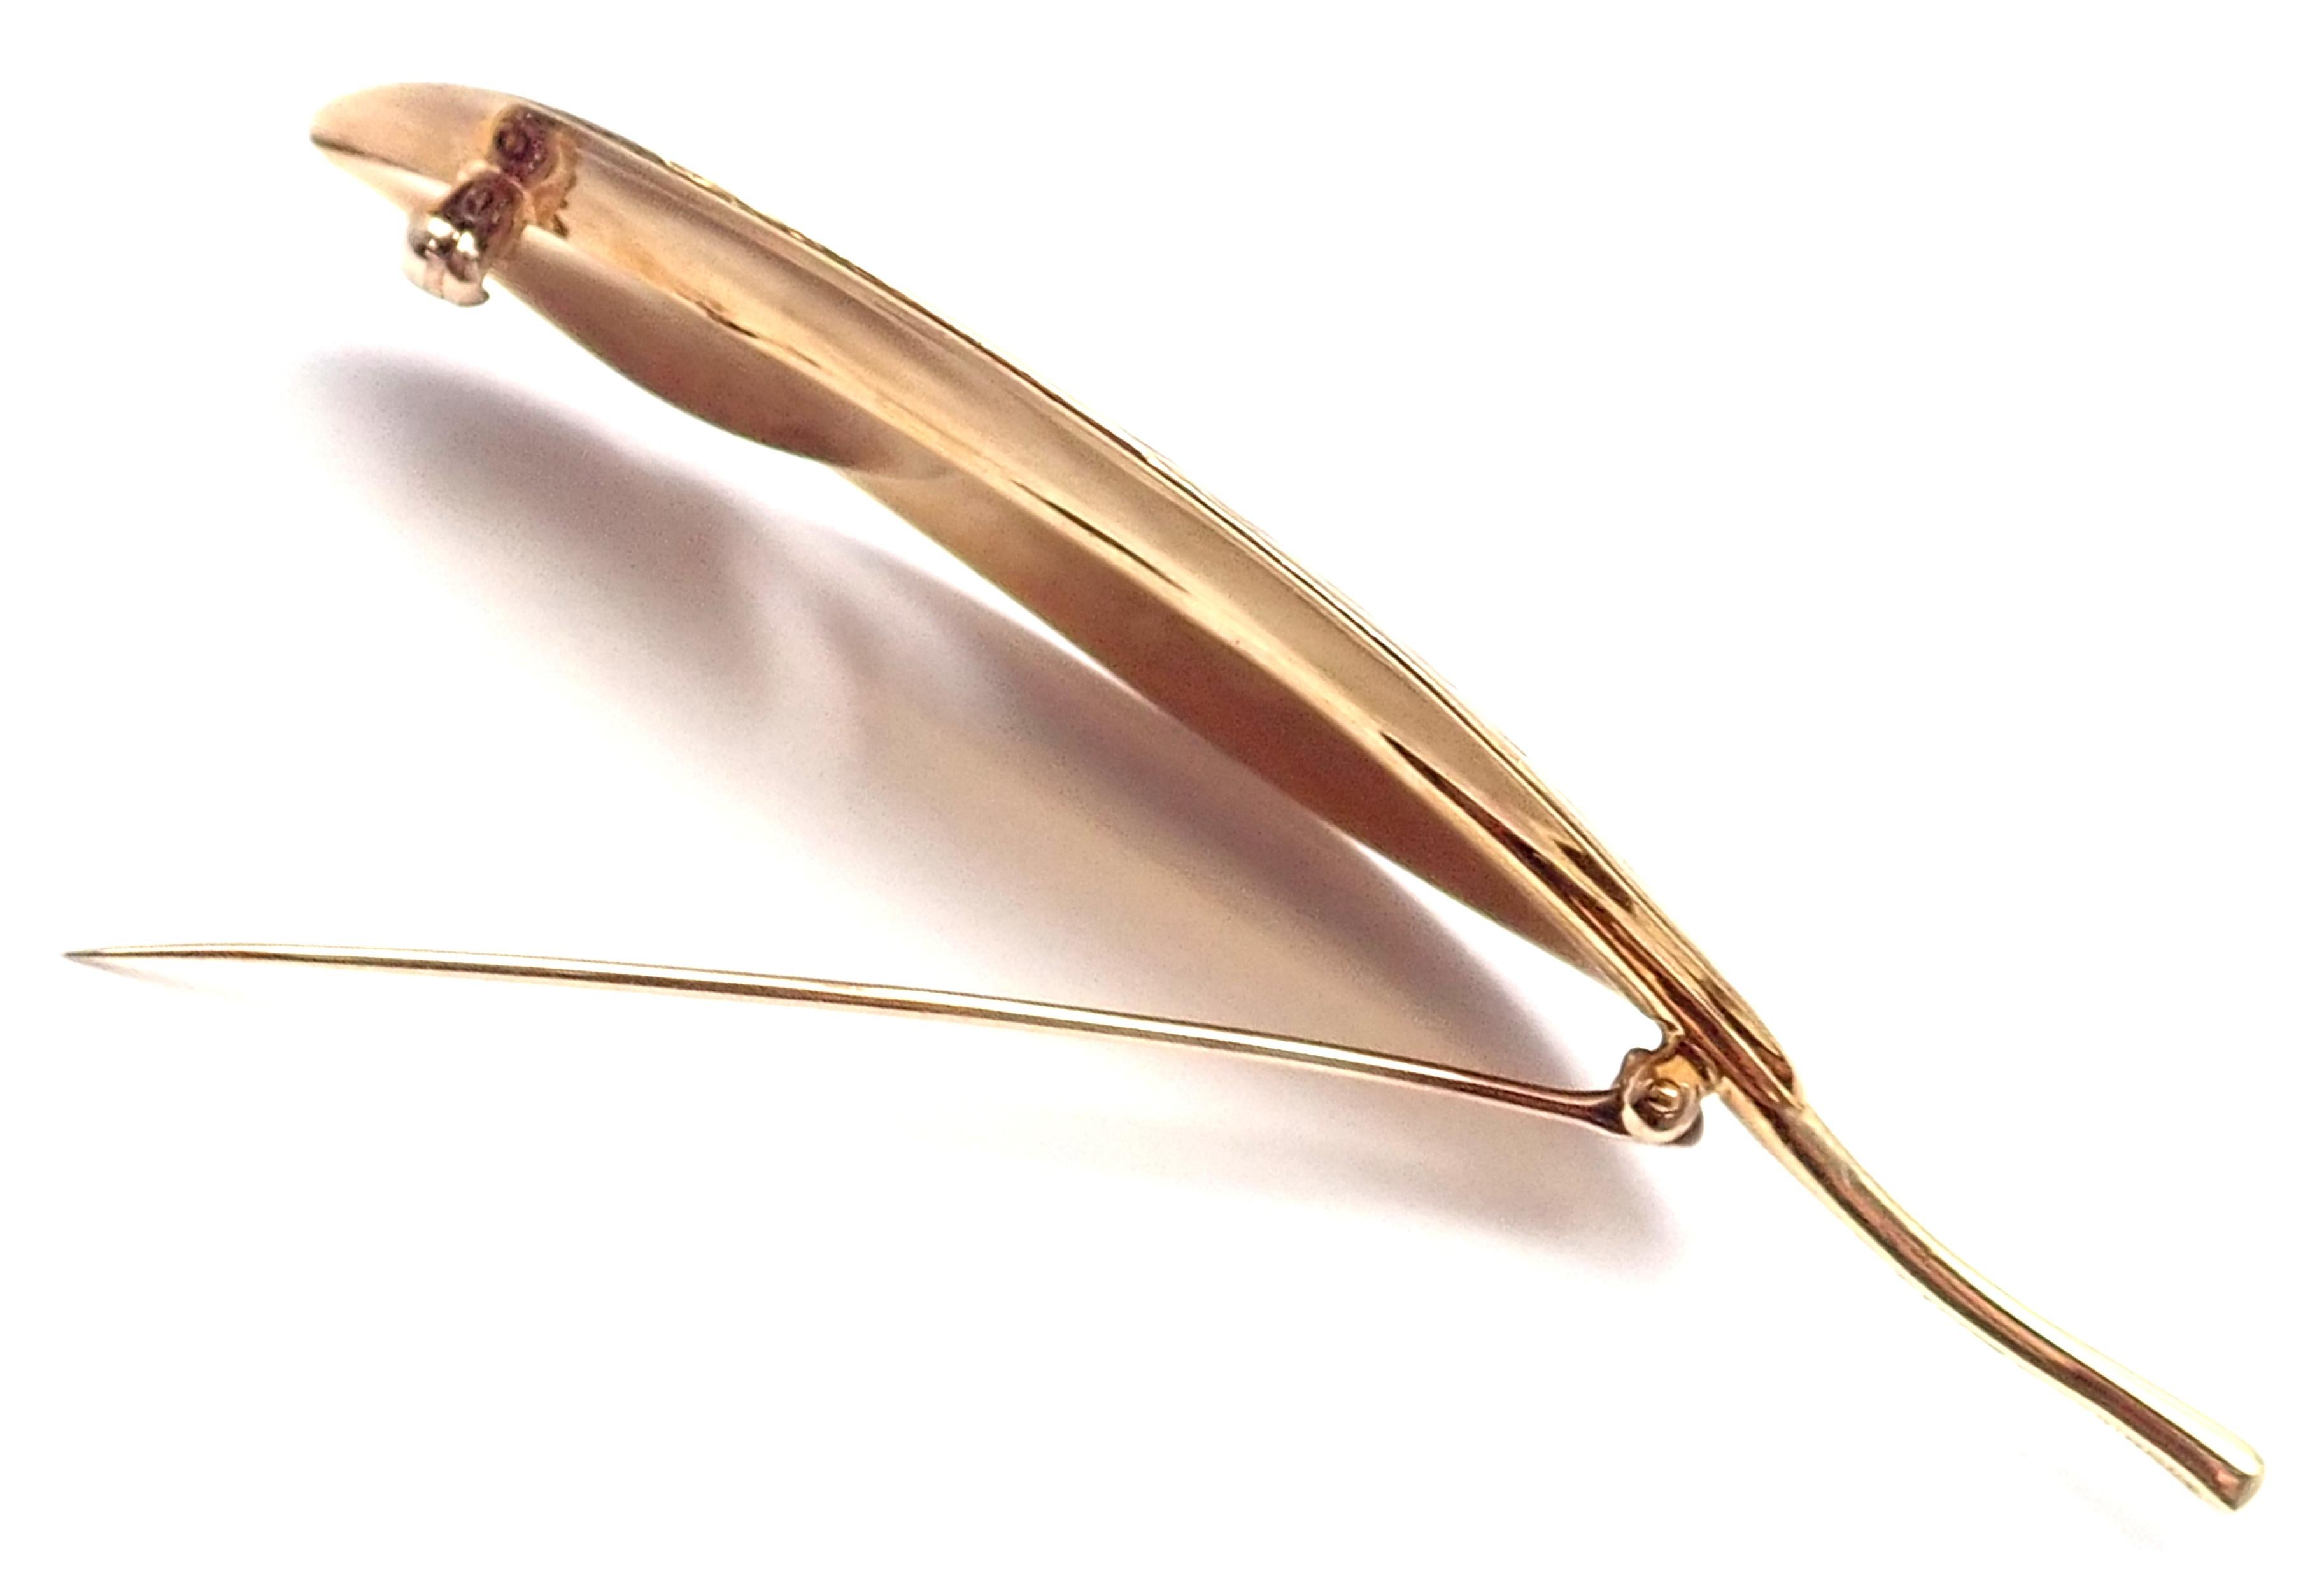 18k Yellow Gold Brooch by Angela Cummings for Tiffany & Co. 
Details: 
Measurements: 2 3/4